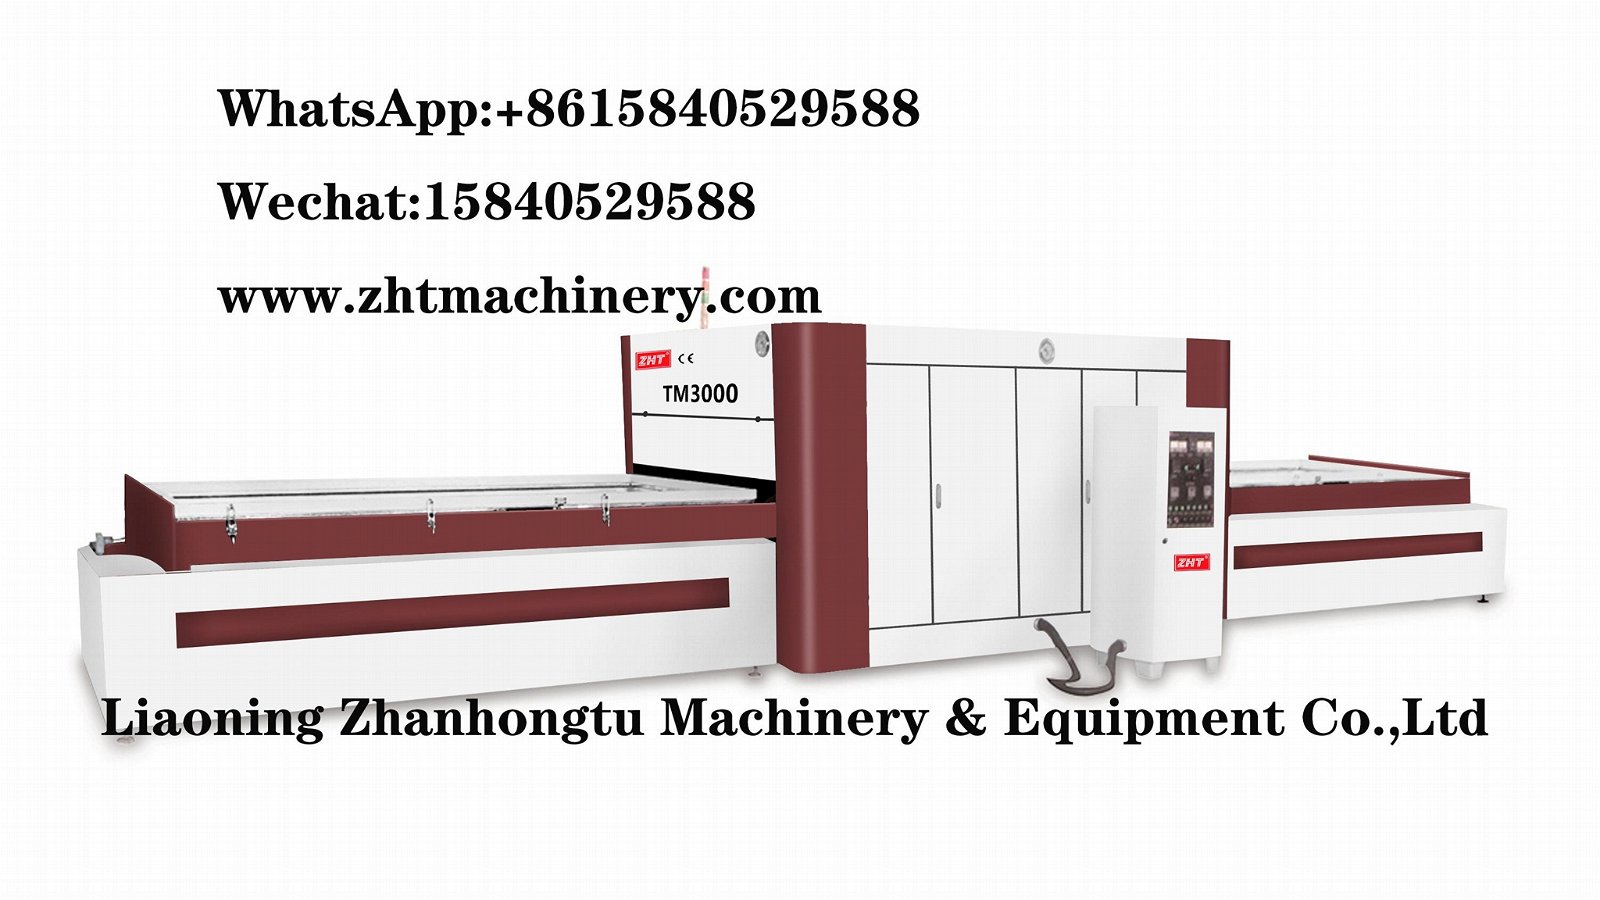 Manufacturer of standard and custom hydraulic laminating presses ZHT MACHINERY 4